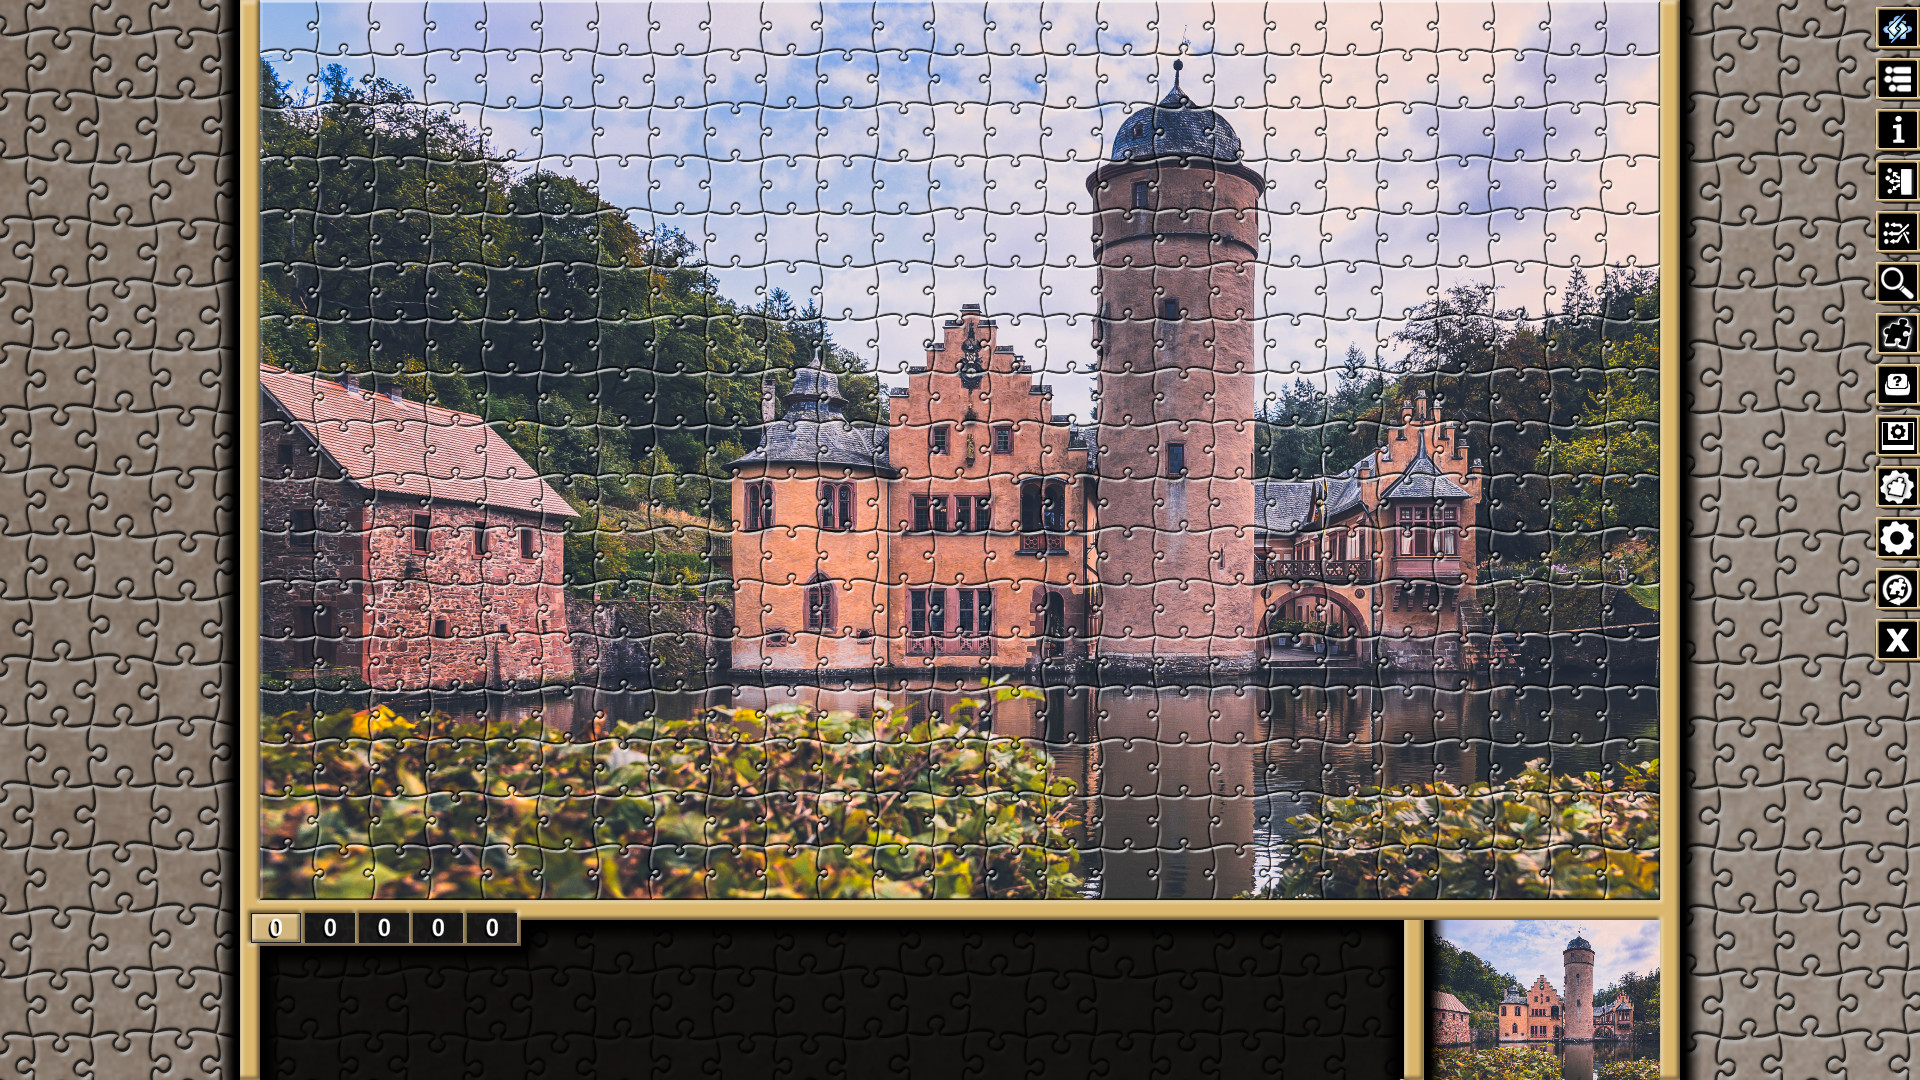 Pixel Puzzles Traditional Jigsaws Pack: German Castles Featured Screenshot #1